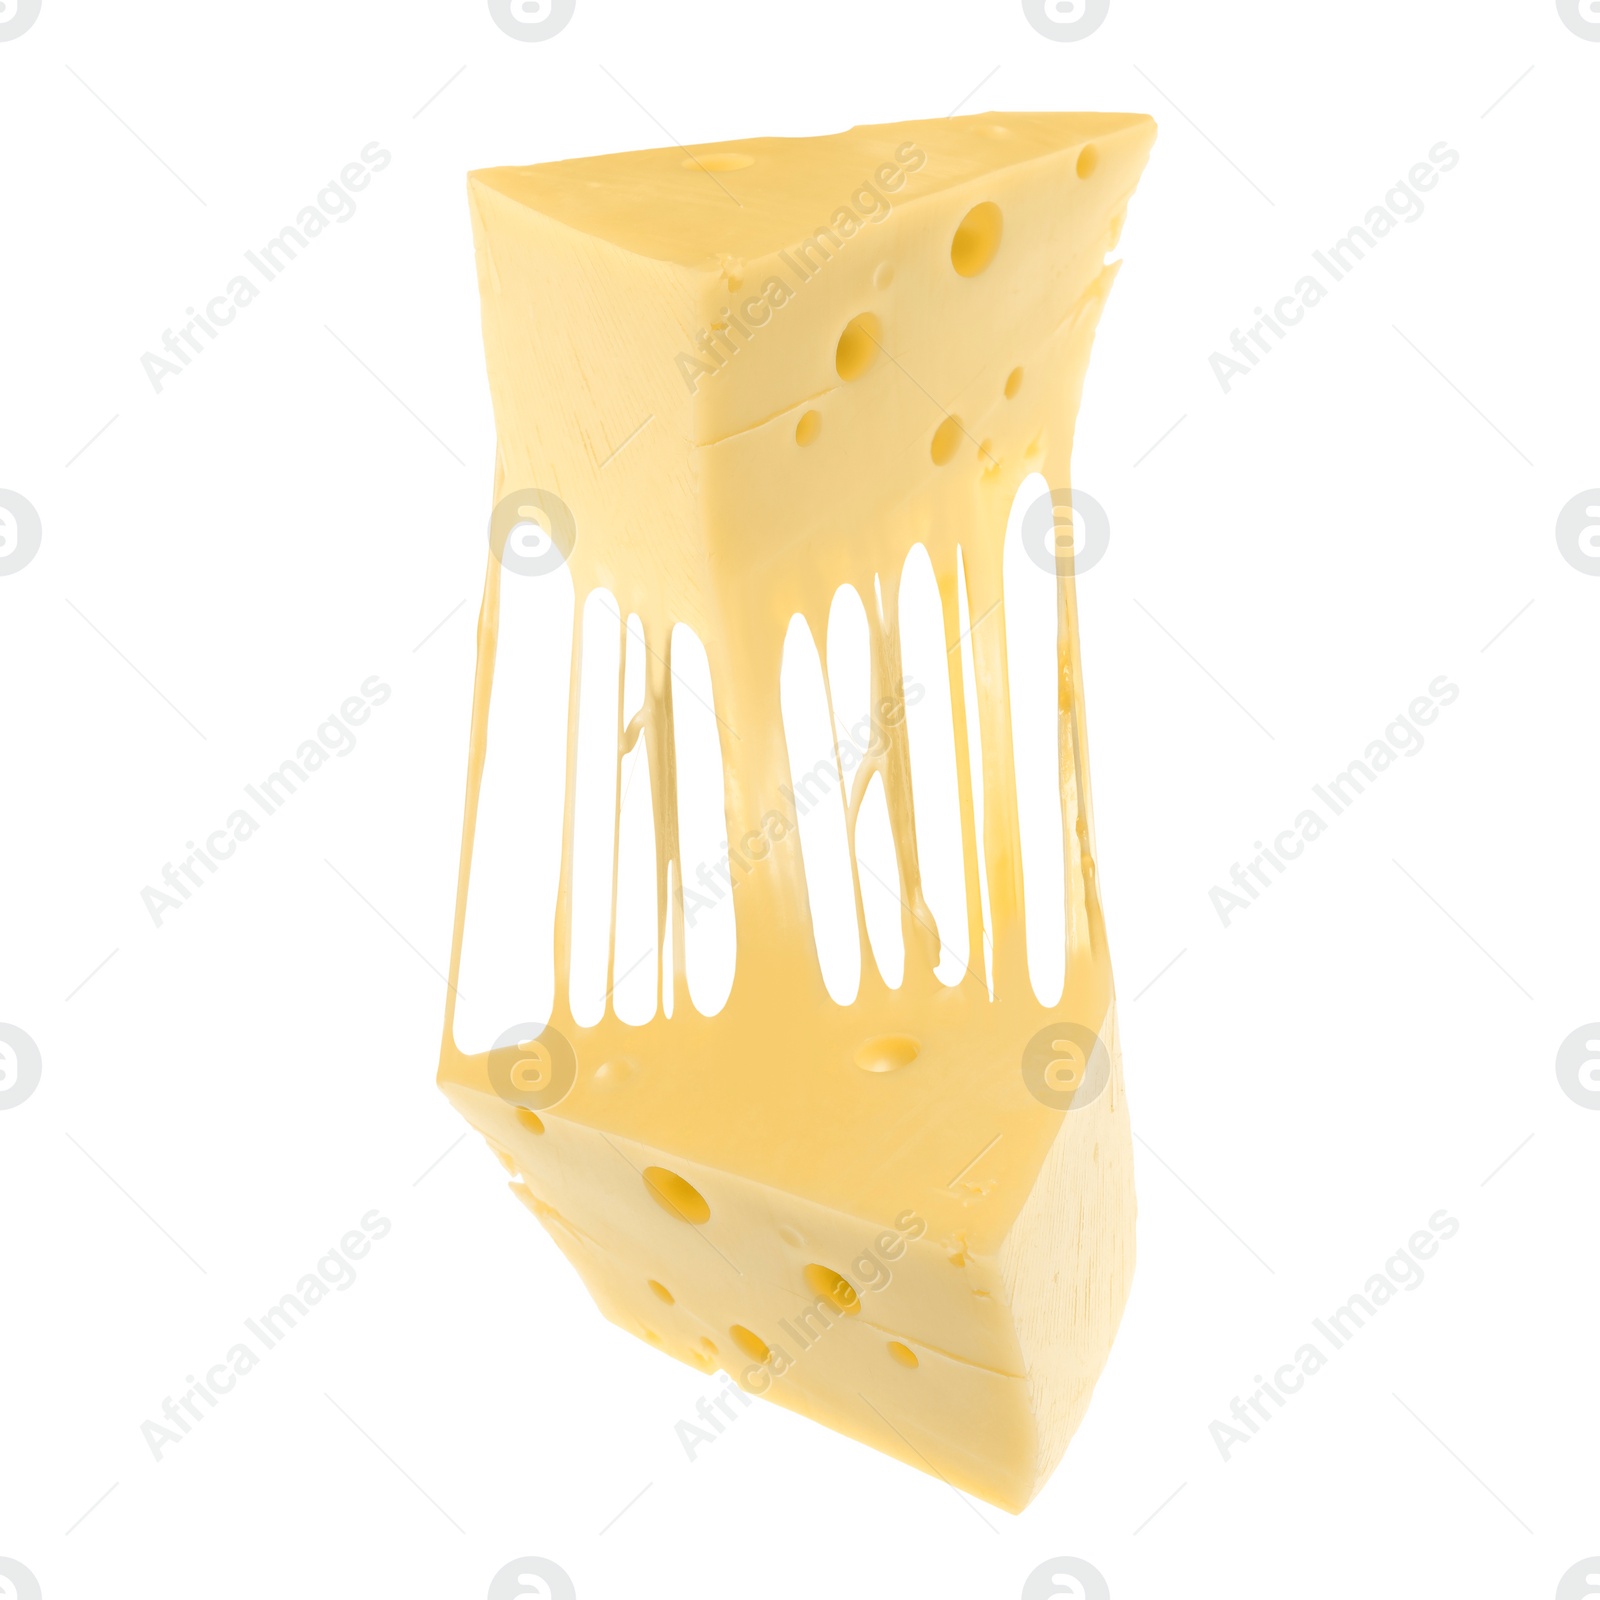 Image of Tasty cheese stretching in air on white background